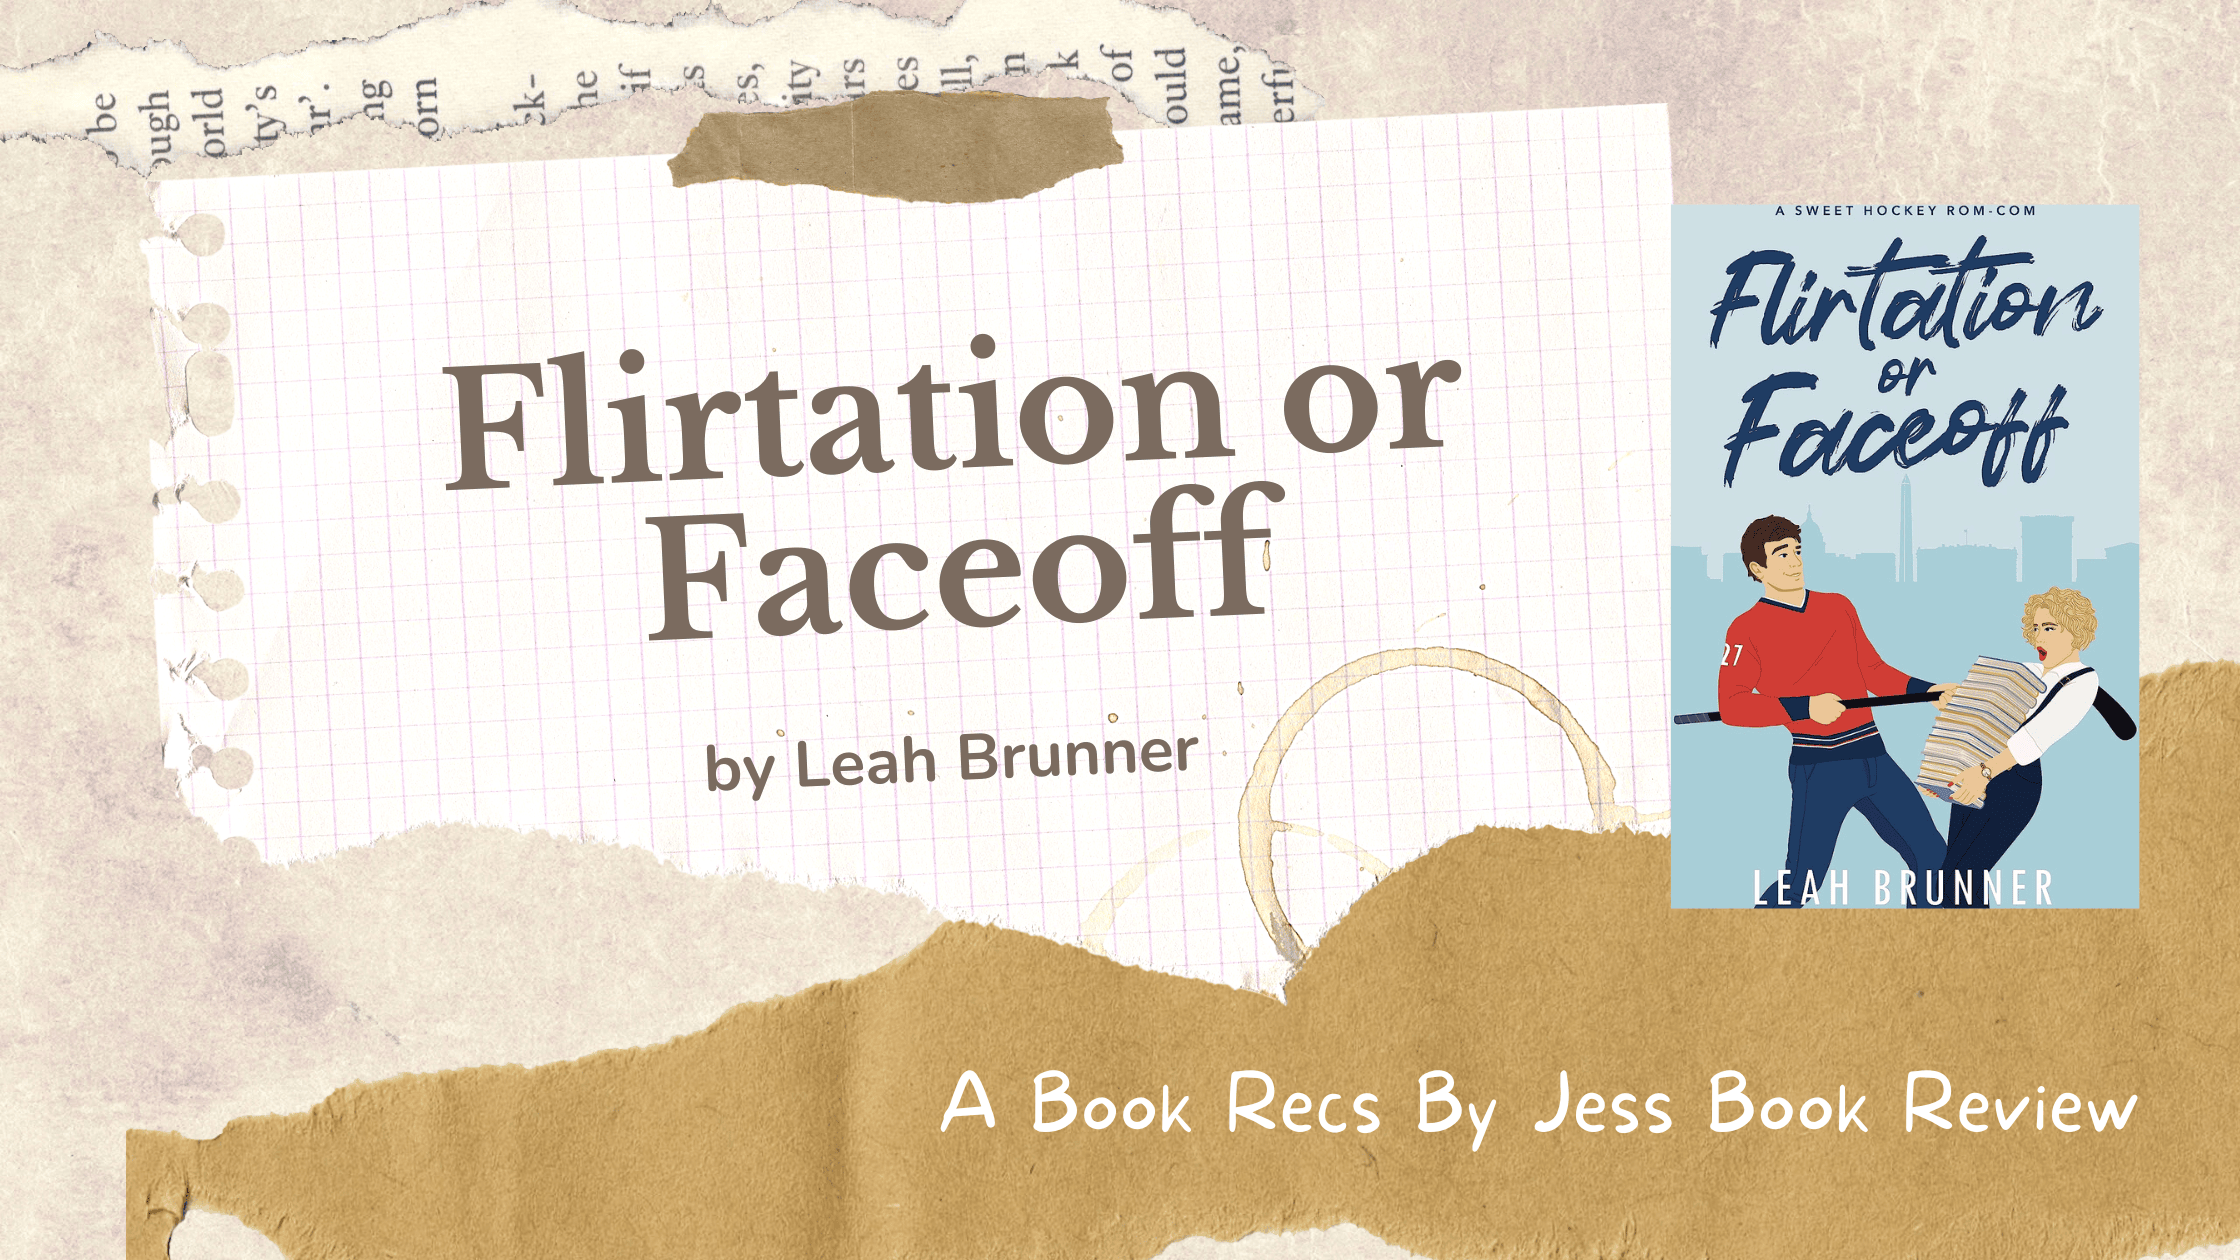 Flirtation or Faceoff by Leah Brunner book review